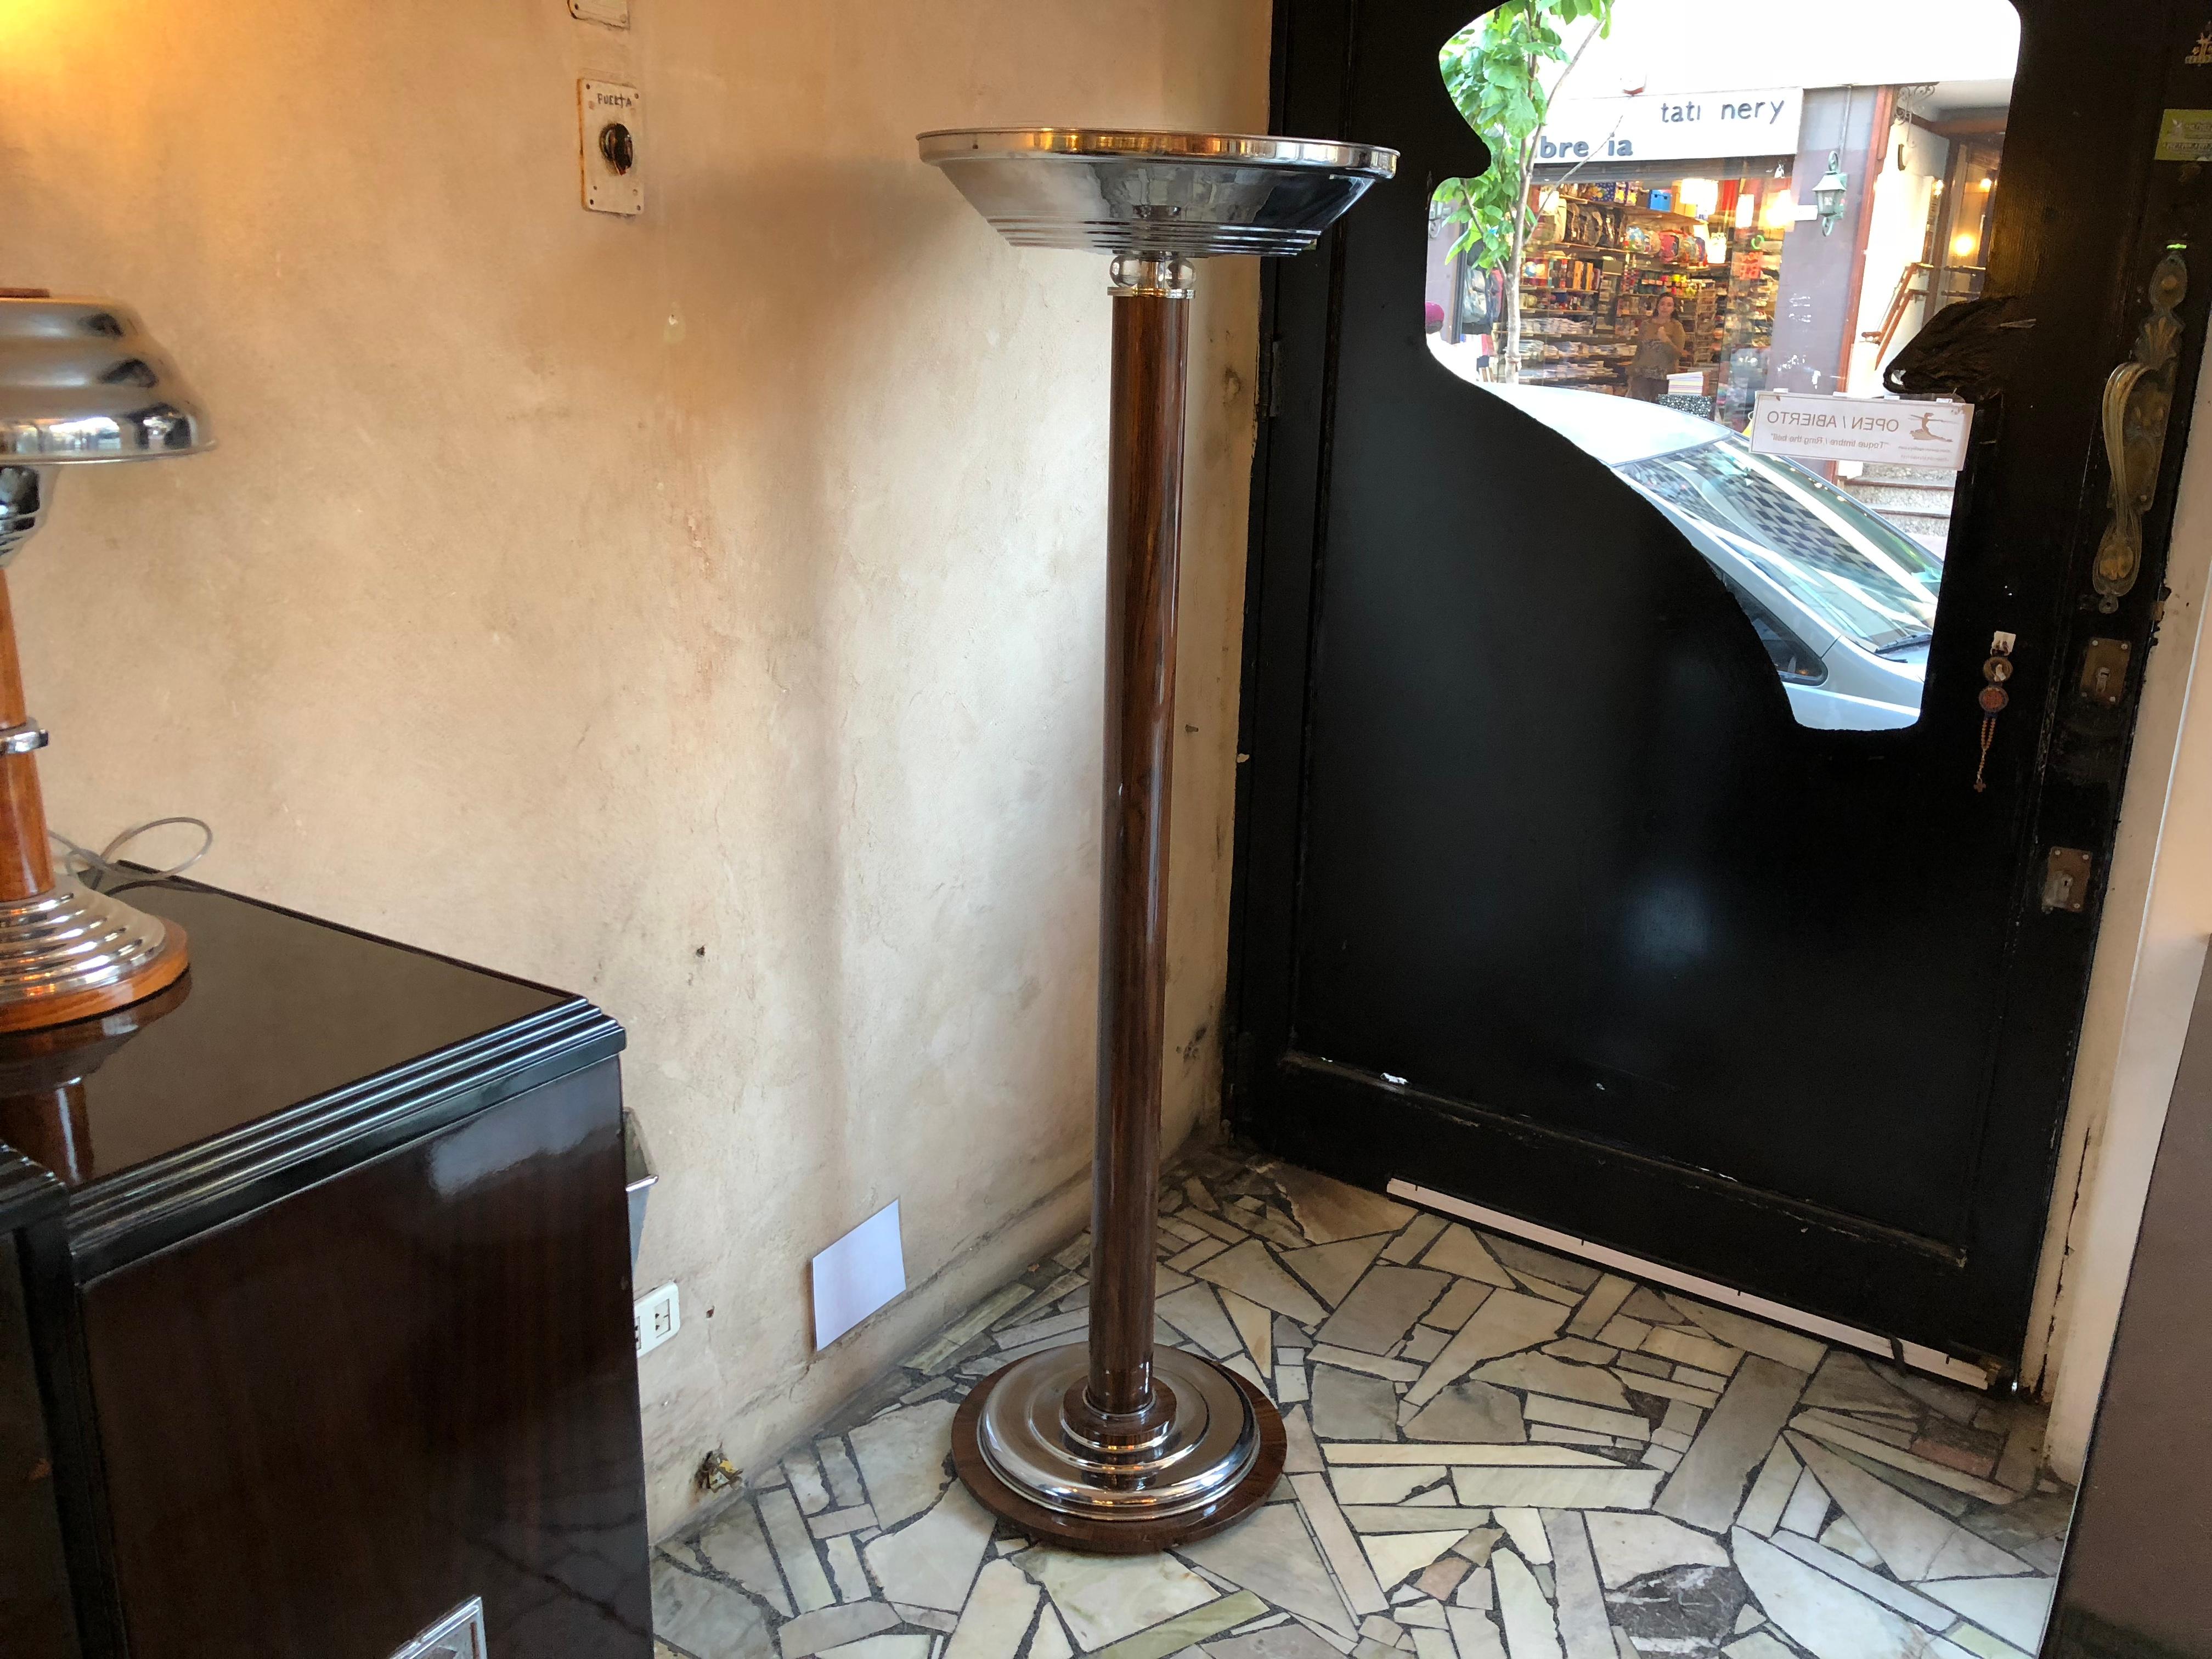 2 floor lamps Art Deco
Materials: wood, glass, chrome
France
1930
You want to live in the golden years, those are the floor lamps that your project needs.
We have specialized in the sale of Art Deco and Art Nouveau styles since 1982.
Pushing the